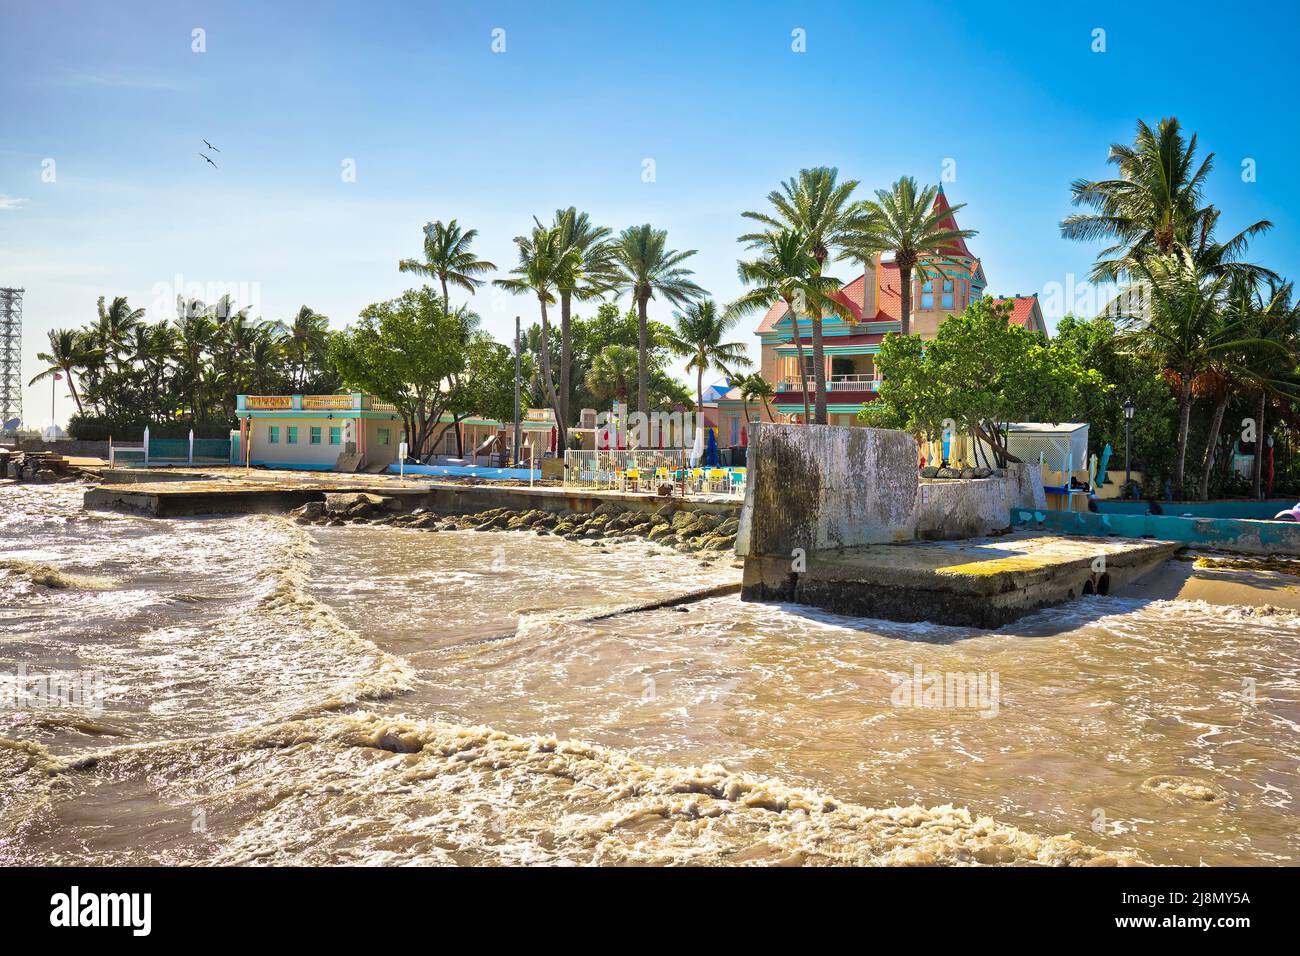 Duval Street Pocket Park beach and waterfront in Key West view, south Florida Keys, United states of America Stock Photo